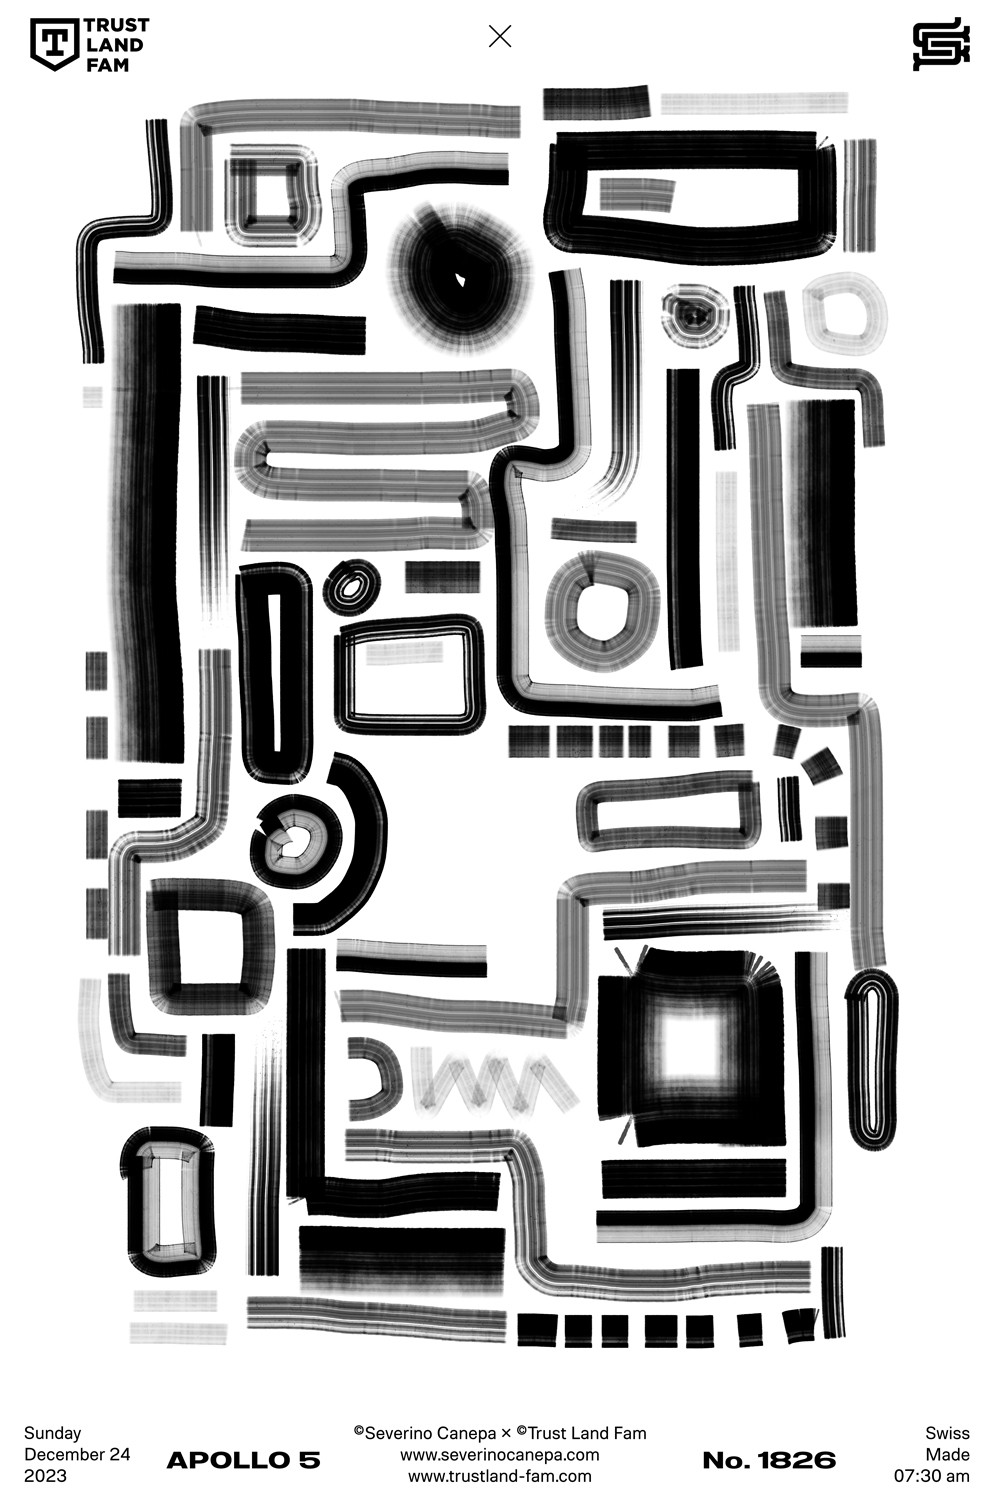 Abstract poster creation I realized with marker brushes